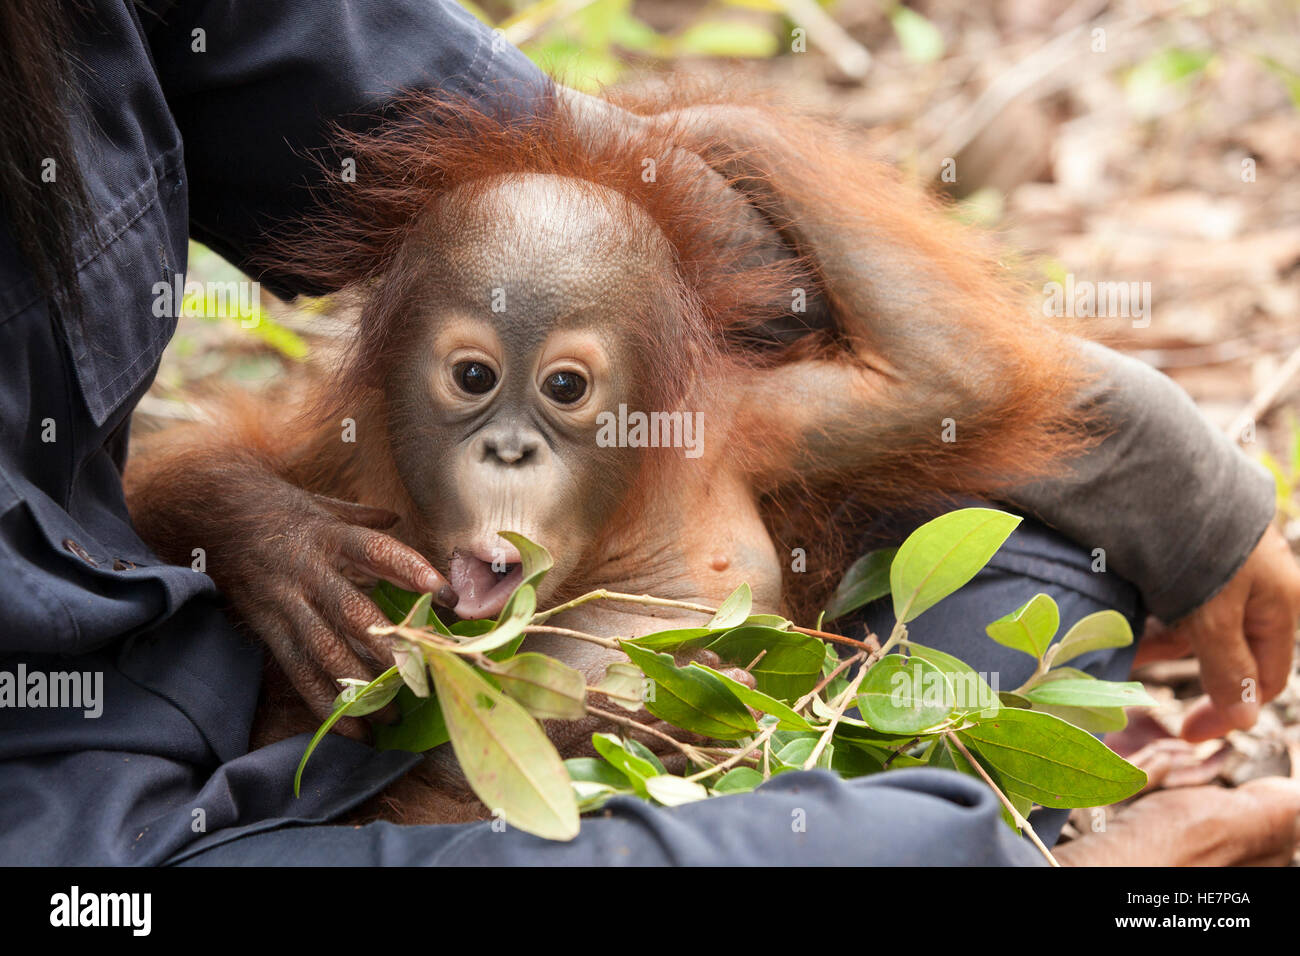 Curious baby orphan orangutan on caretaker's lap playing with leaves in forest training session to prepare for eventual release into the wild, Borneo Stock Photo